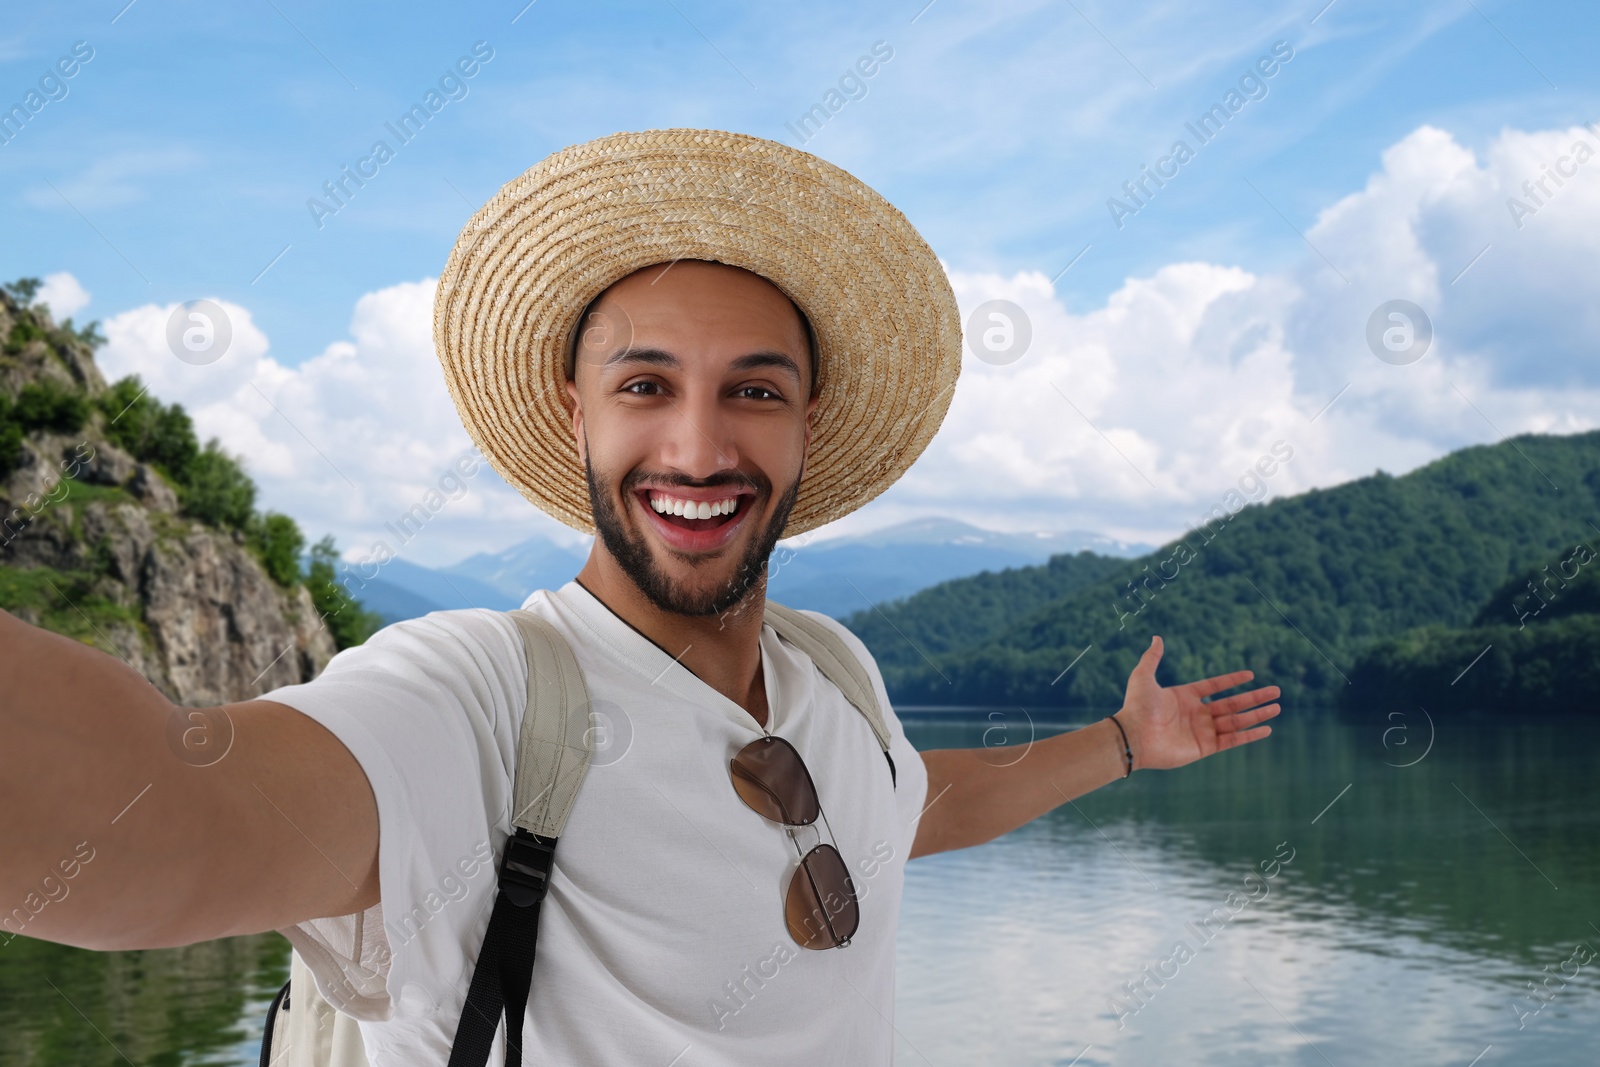 Image of Smiling young man in straw hat taking selfie near river in mountains